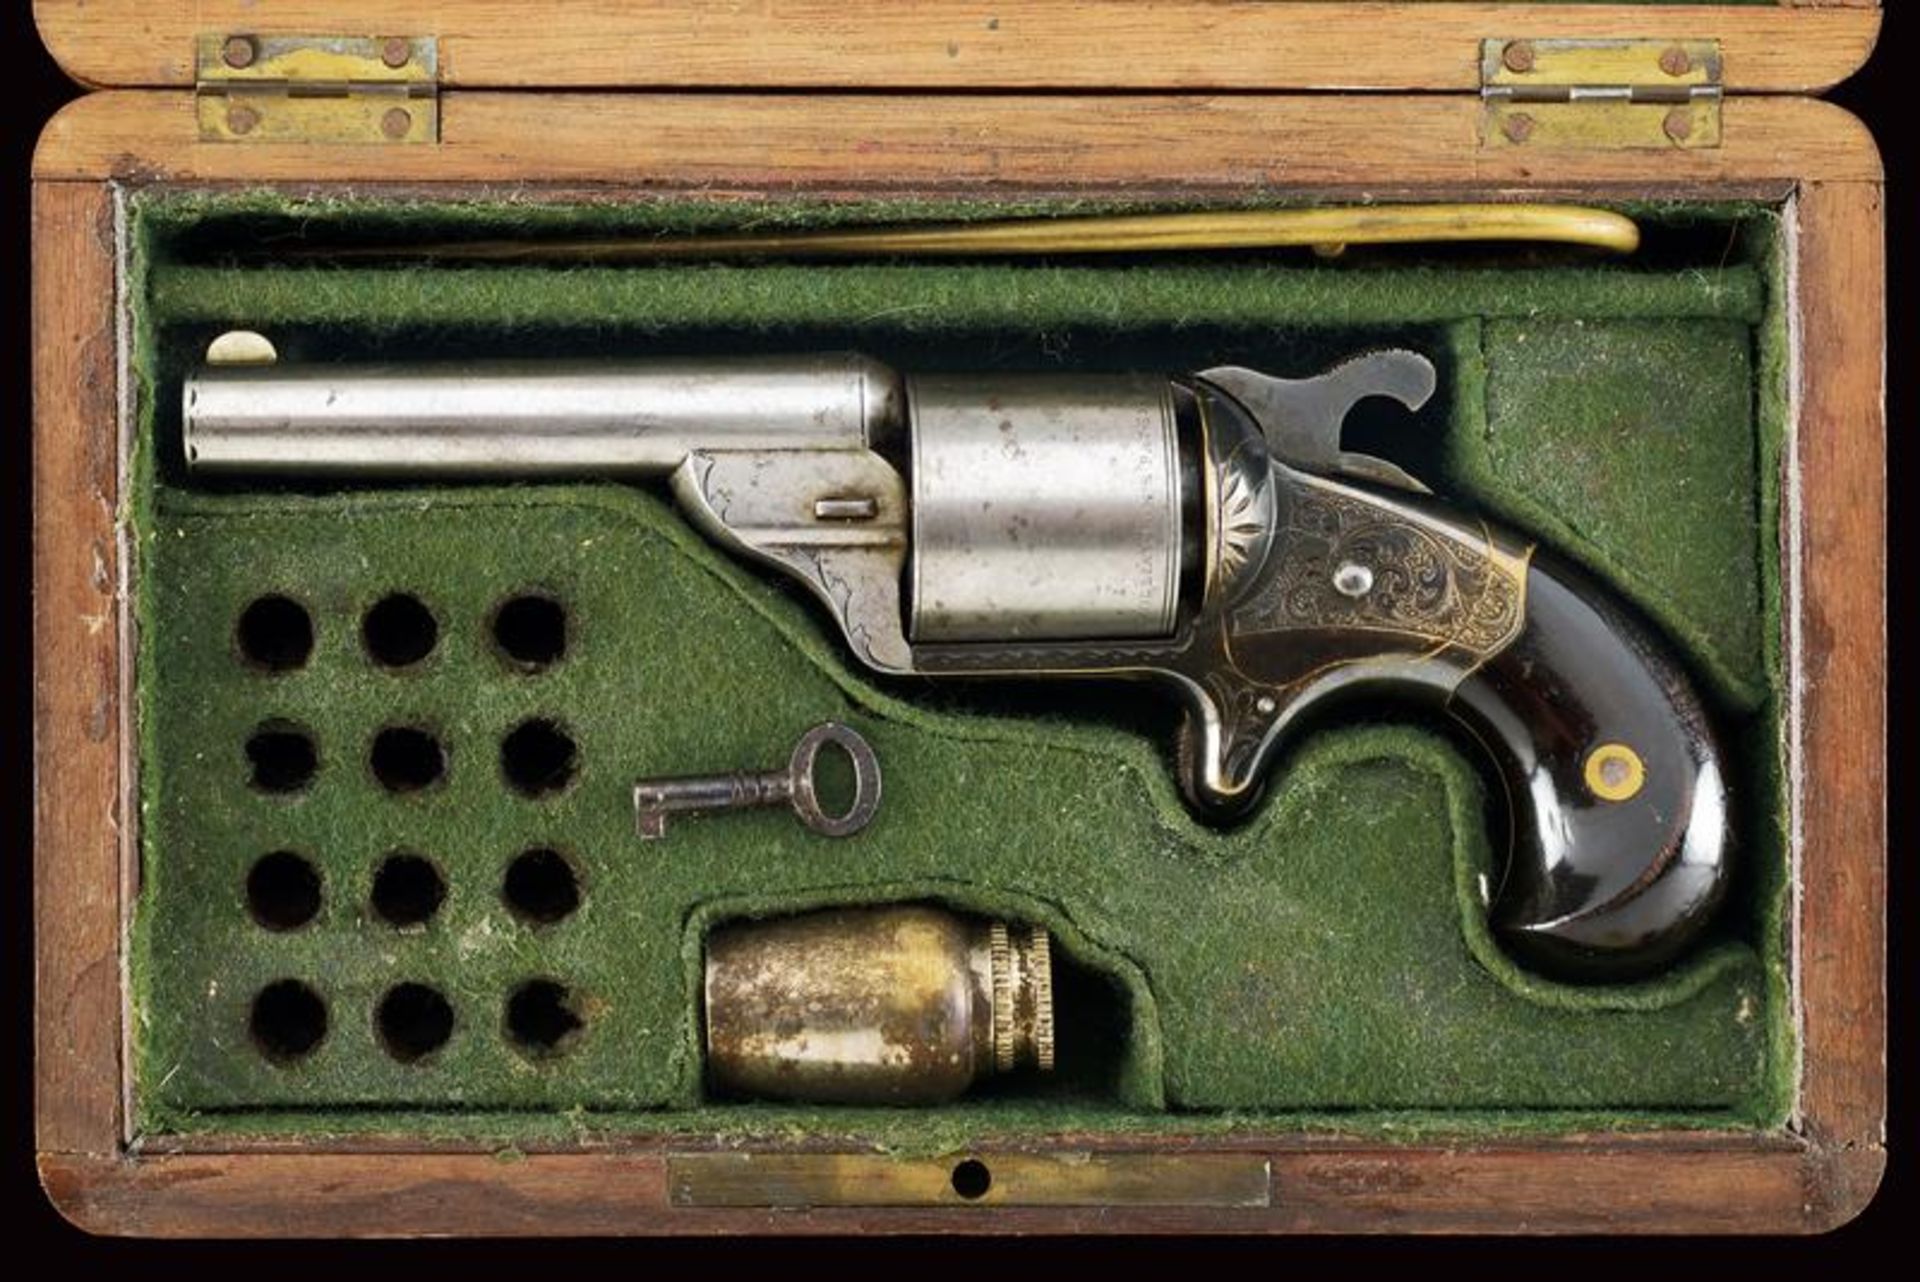 A cased Moore's Patent Firearms Co. Front Loading Revolver